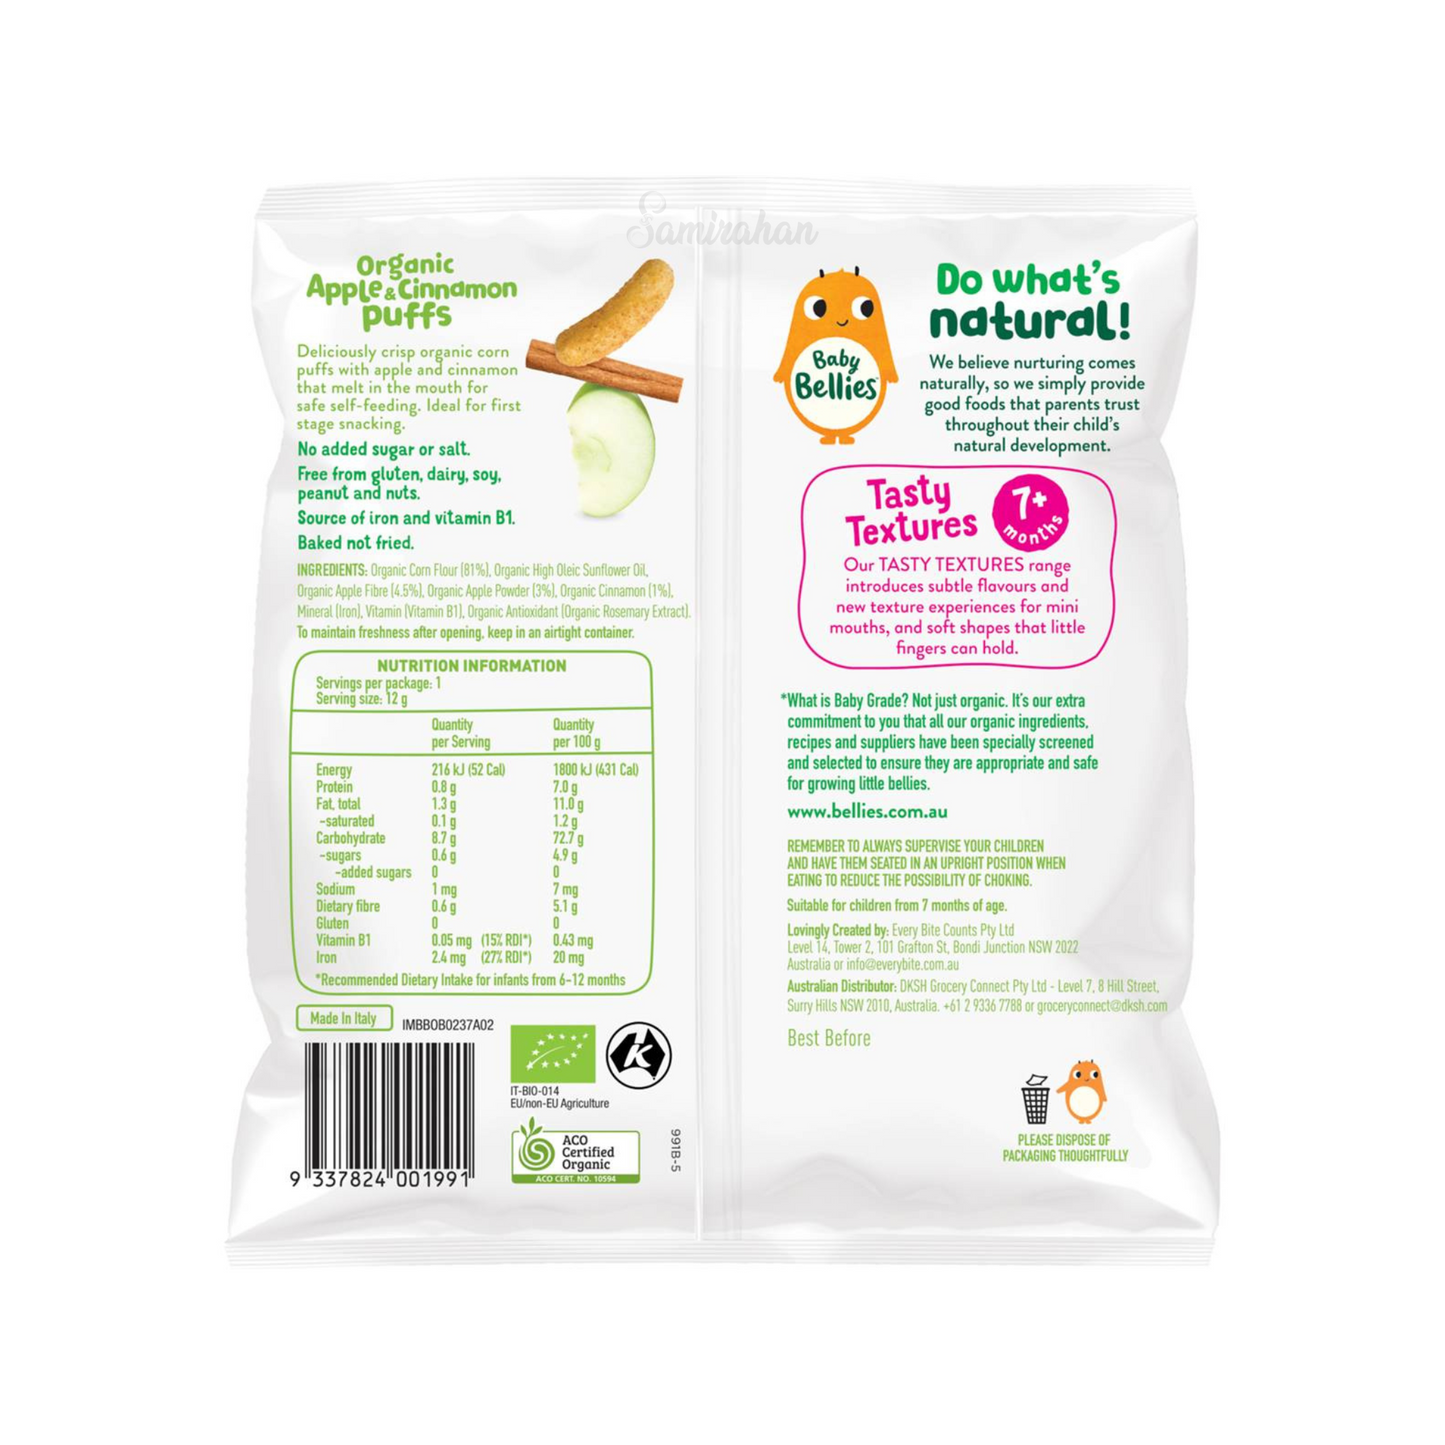 Baby Bellies Organic Apple & Cinnamon Puffs are puffed corn shapes for mini mouths & fingers. No added sugar or salt. Nothing artificial. Halal suitable. Best imported foreign Australian Aussie genuine authentic premium quality real child snack healthy cheap price in Dhaka Chittagong Sylhet Khulna Rajshahi Bangladesh.